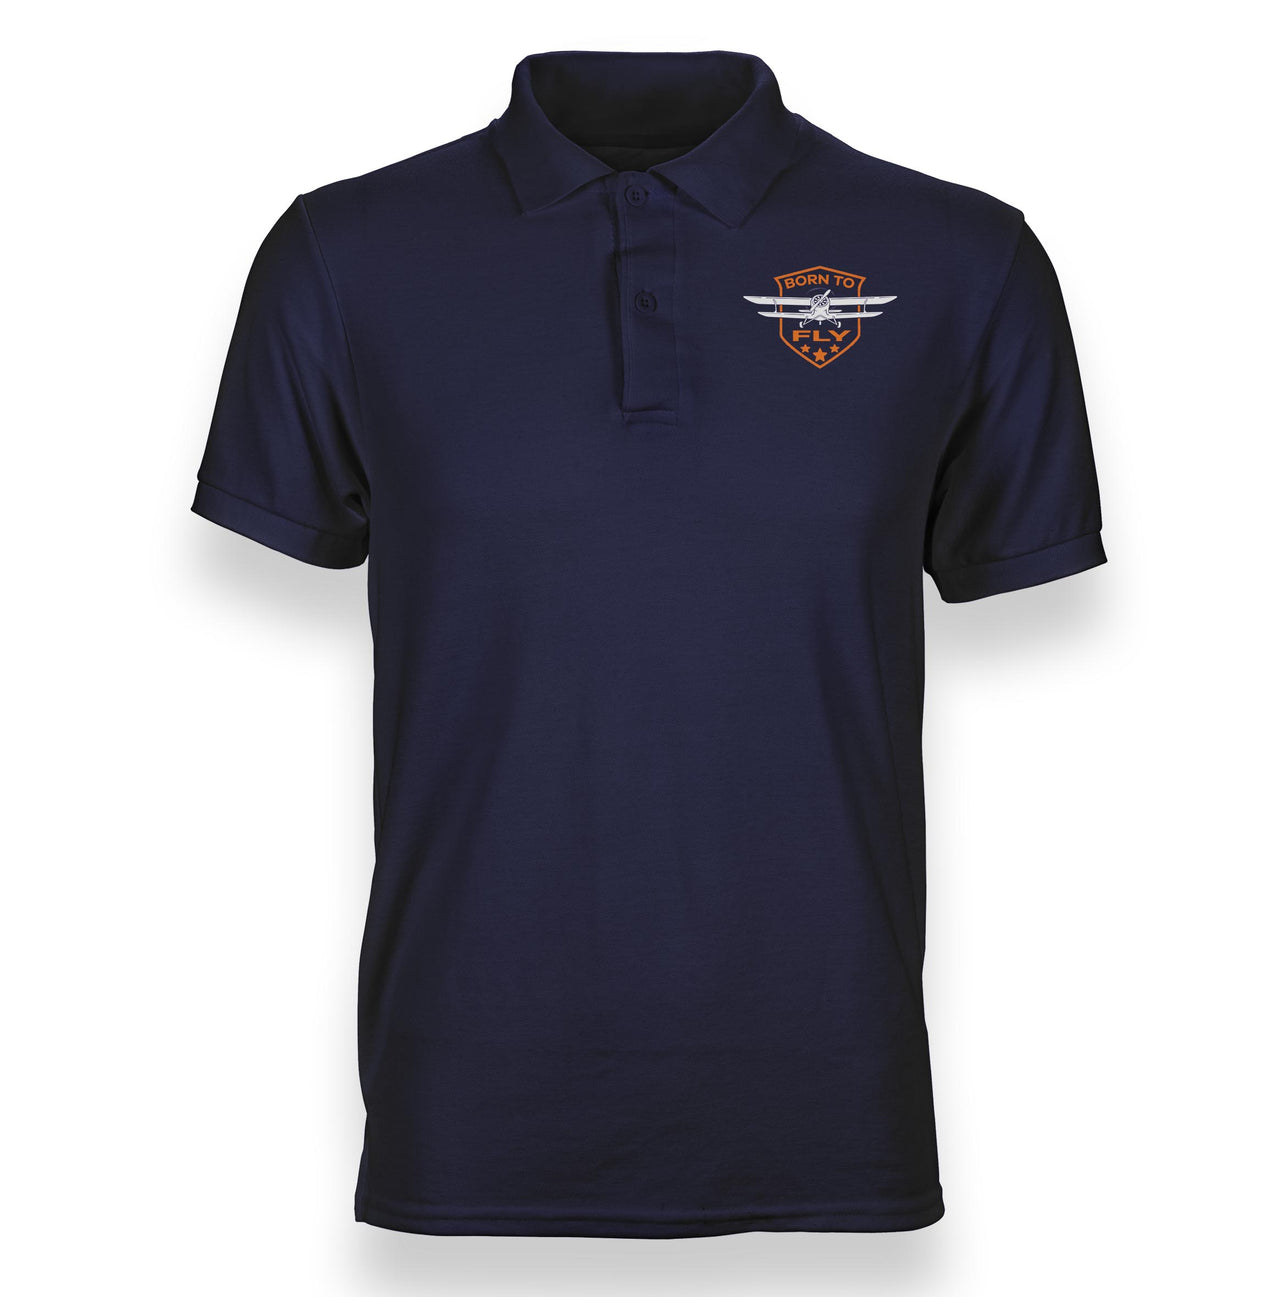 Super Born to Fly Designed Polo T-Shirts